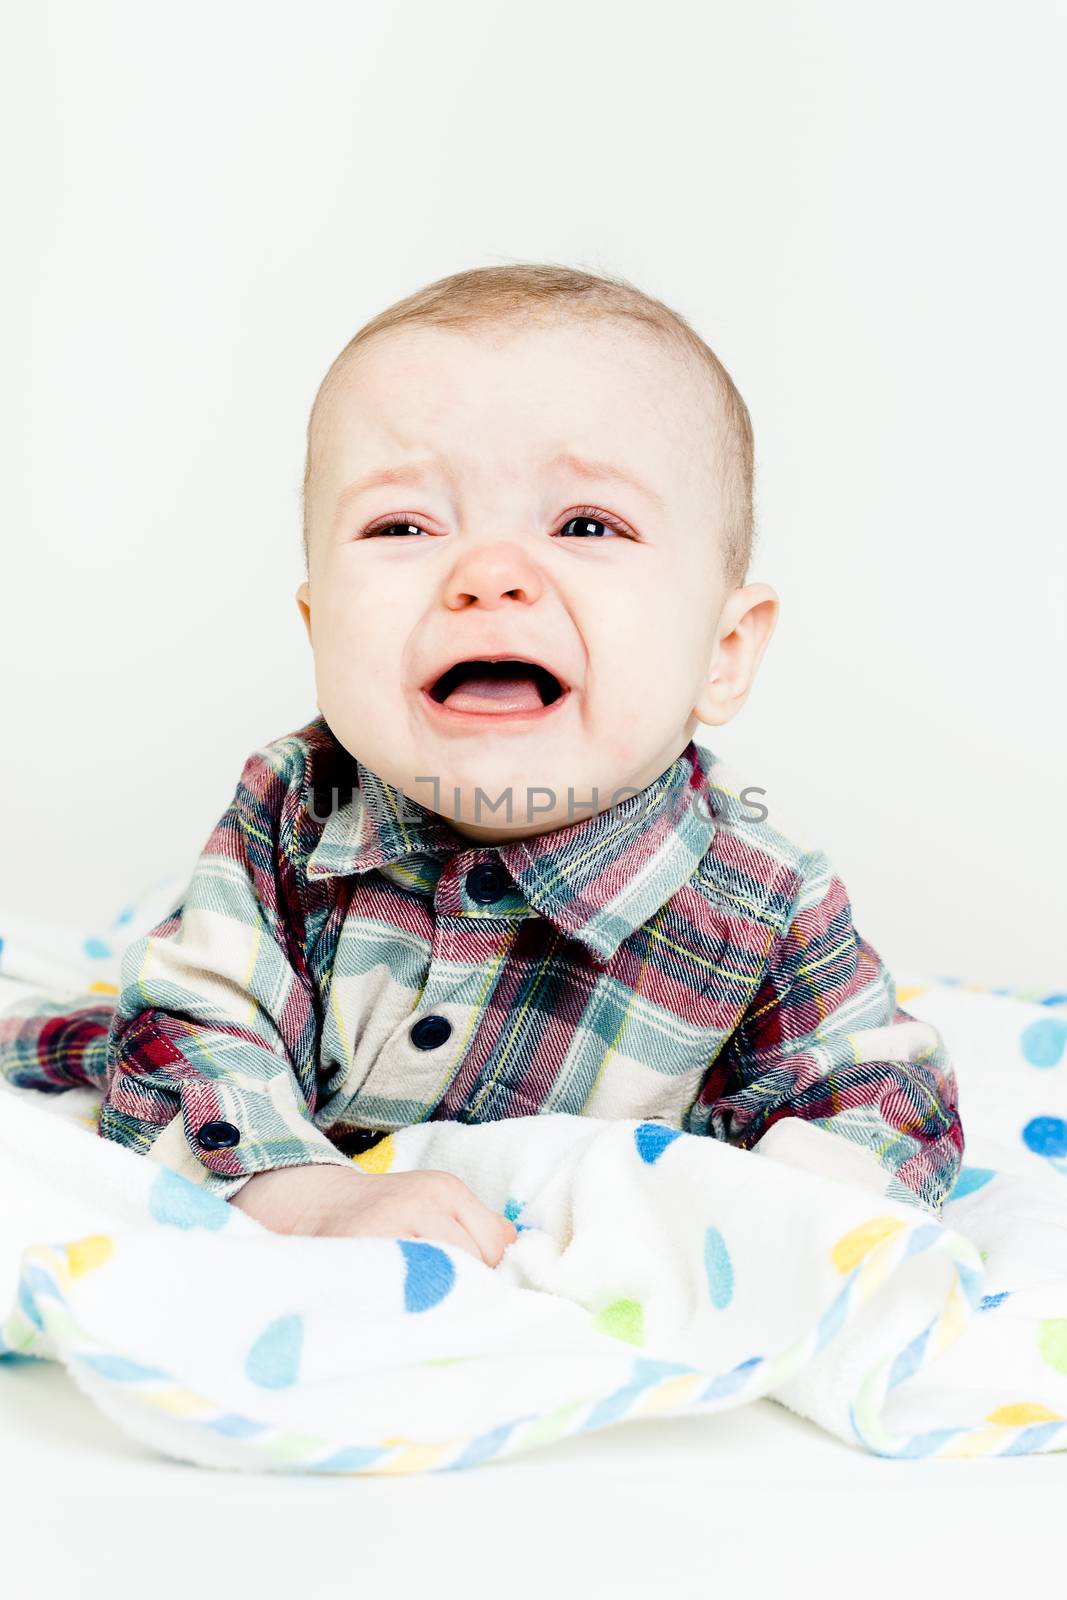 Adorable baby screaming in a plaid shirt. studio photo